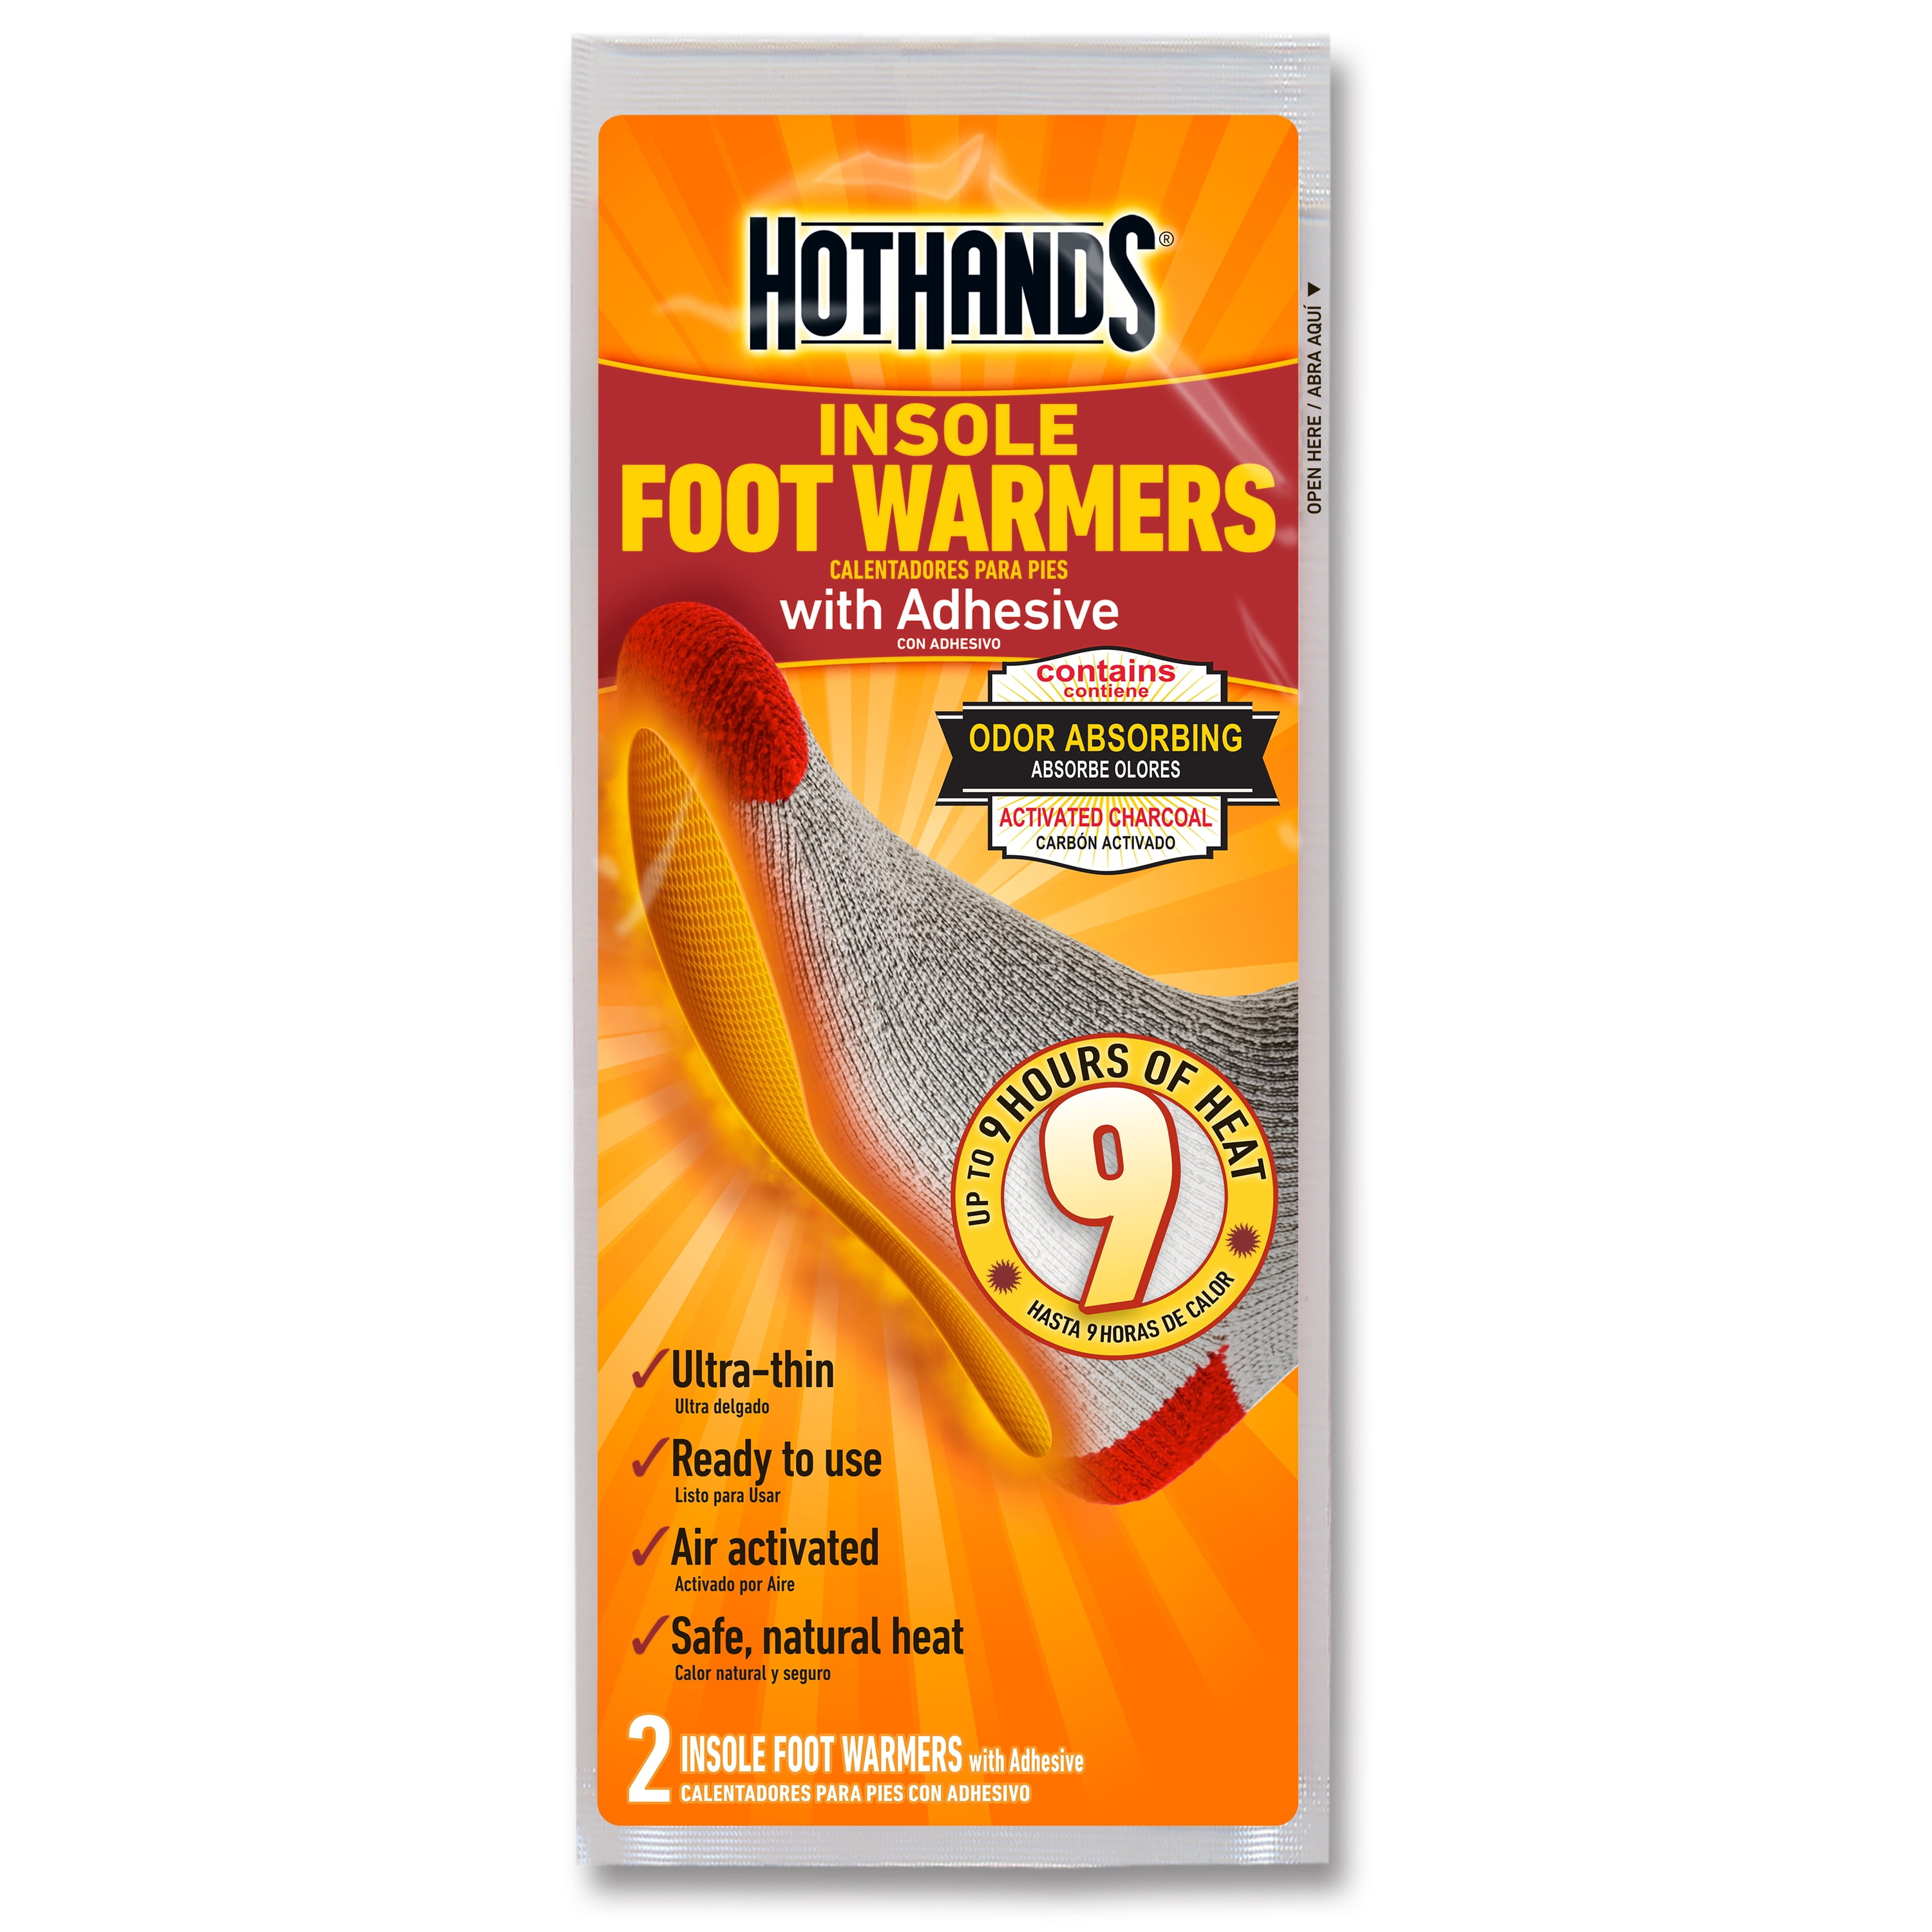 Lot of 3 HotHands Value Pack Toe Warmers 7 Per Pack 21 Total EXP 7/2023 